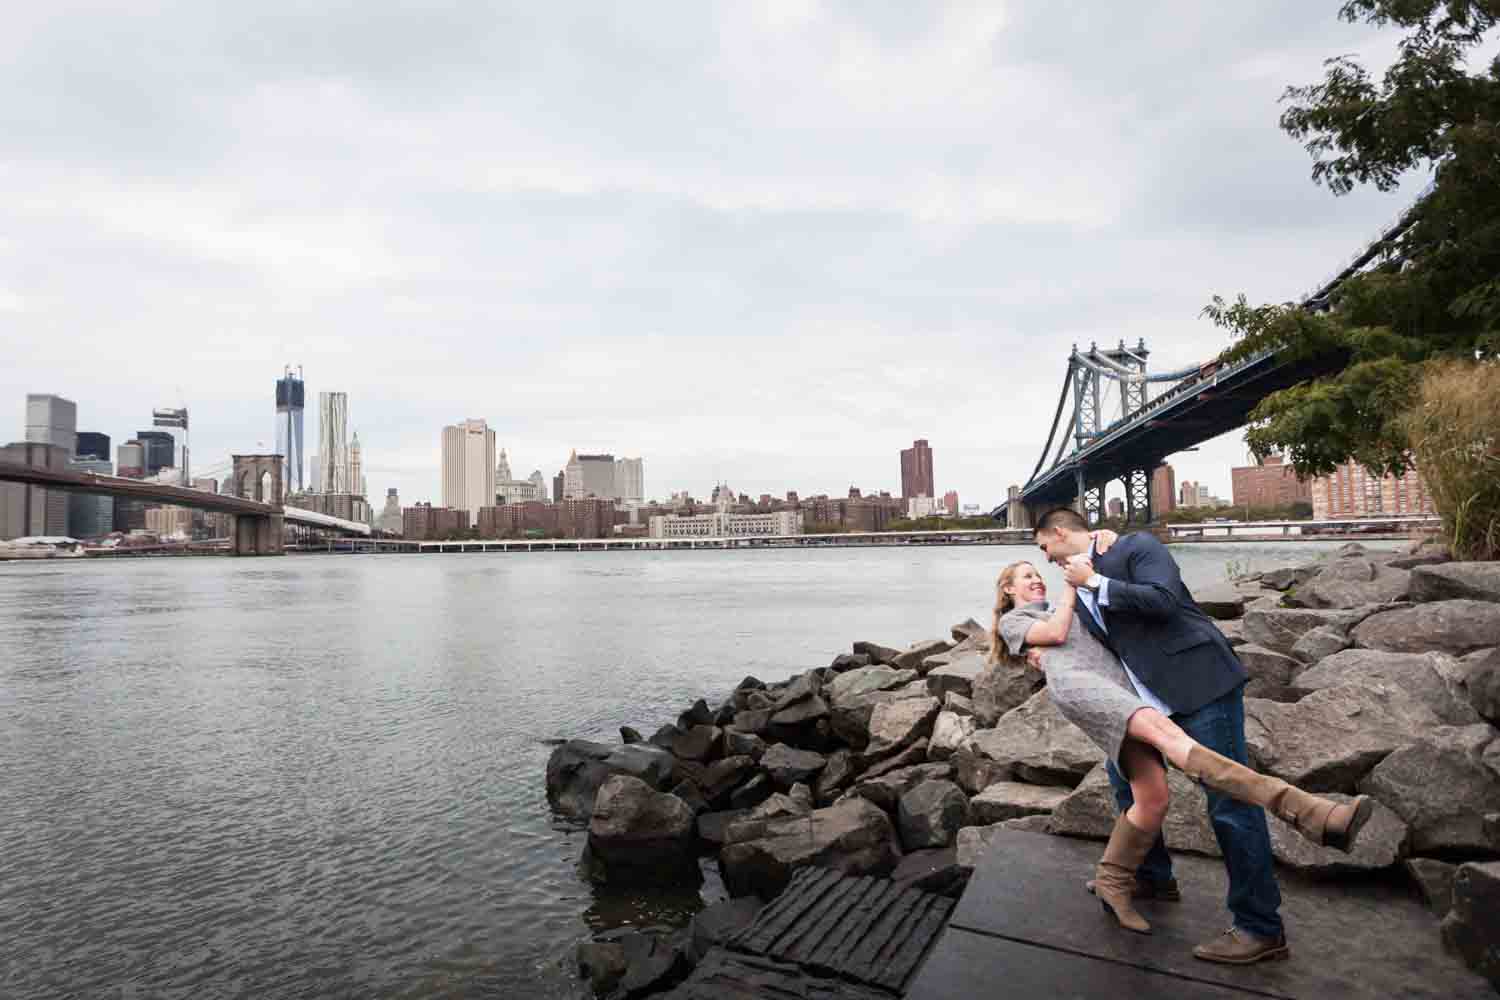 Man dipping woman while dancing with East River and bridges in background